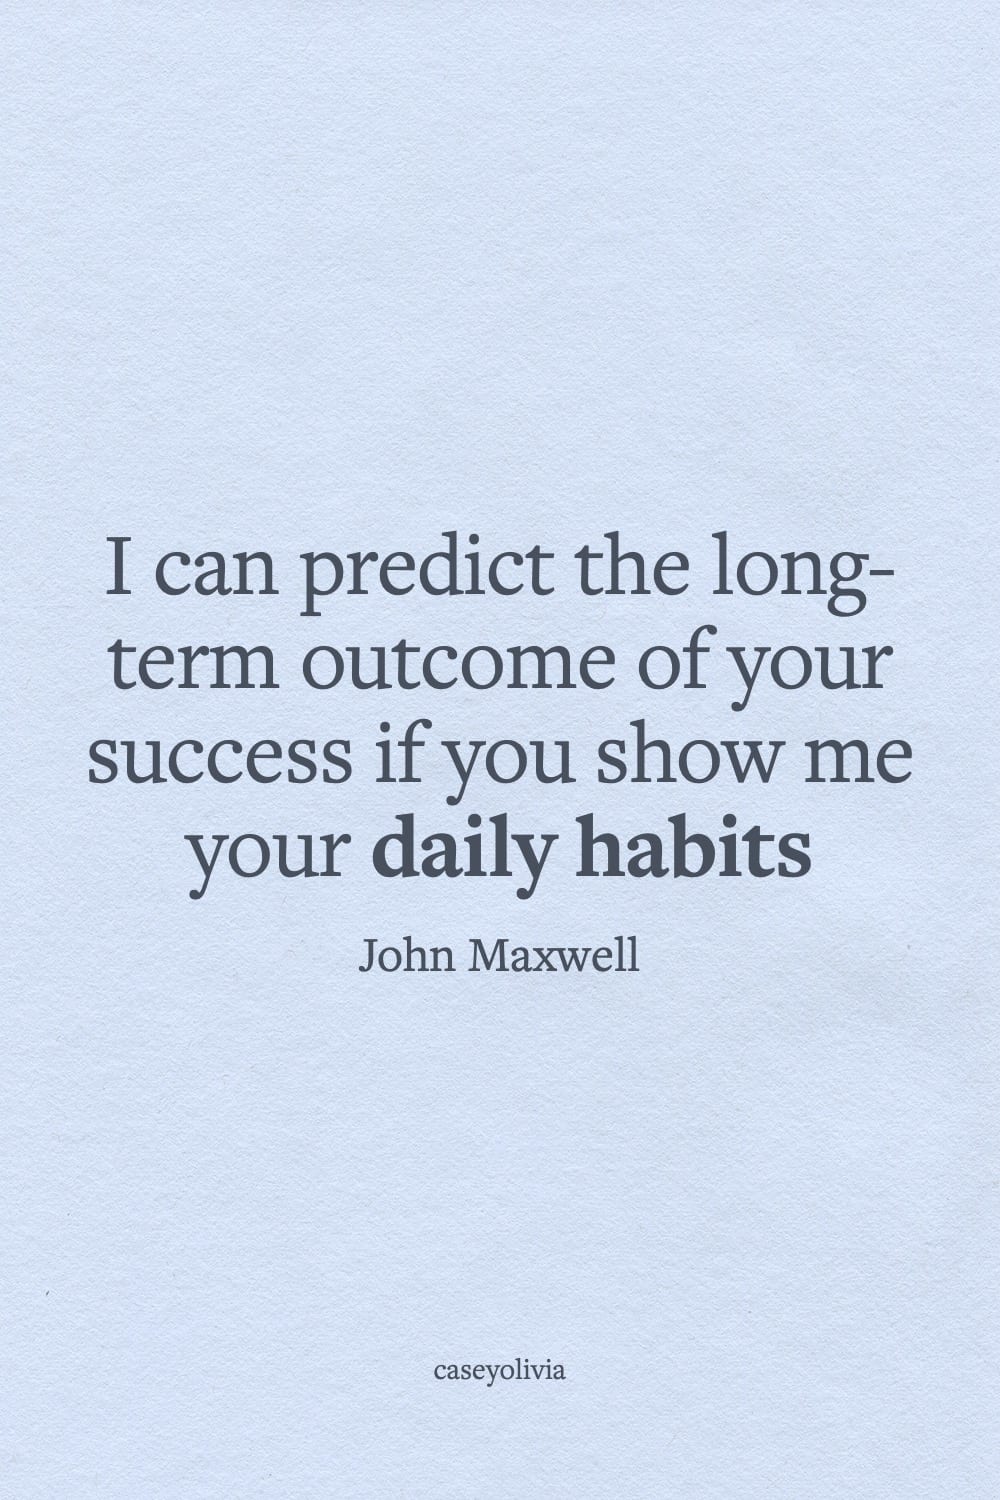 john maxwell daily habits quote for a motivated mindset